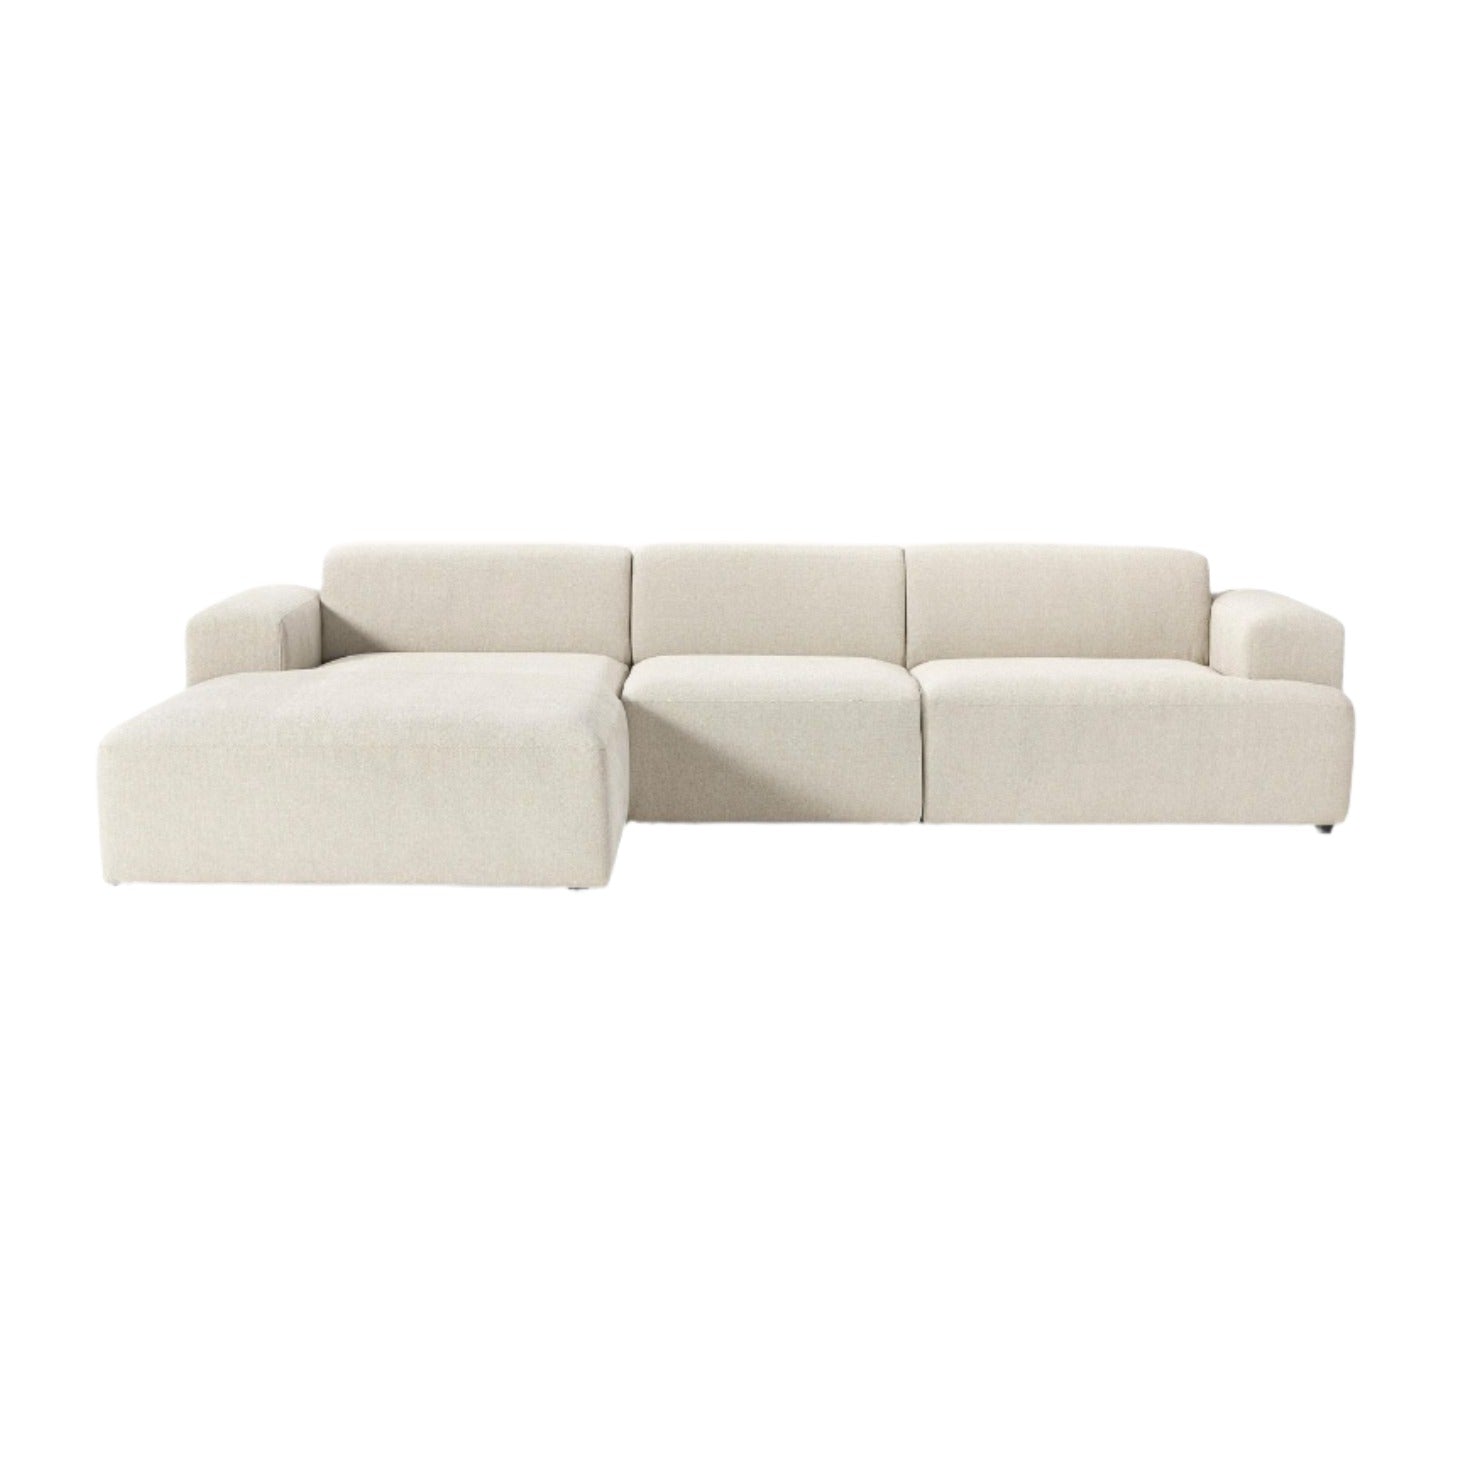 LOLA 4 Seat Extended Chaise Sofa